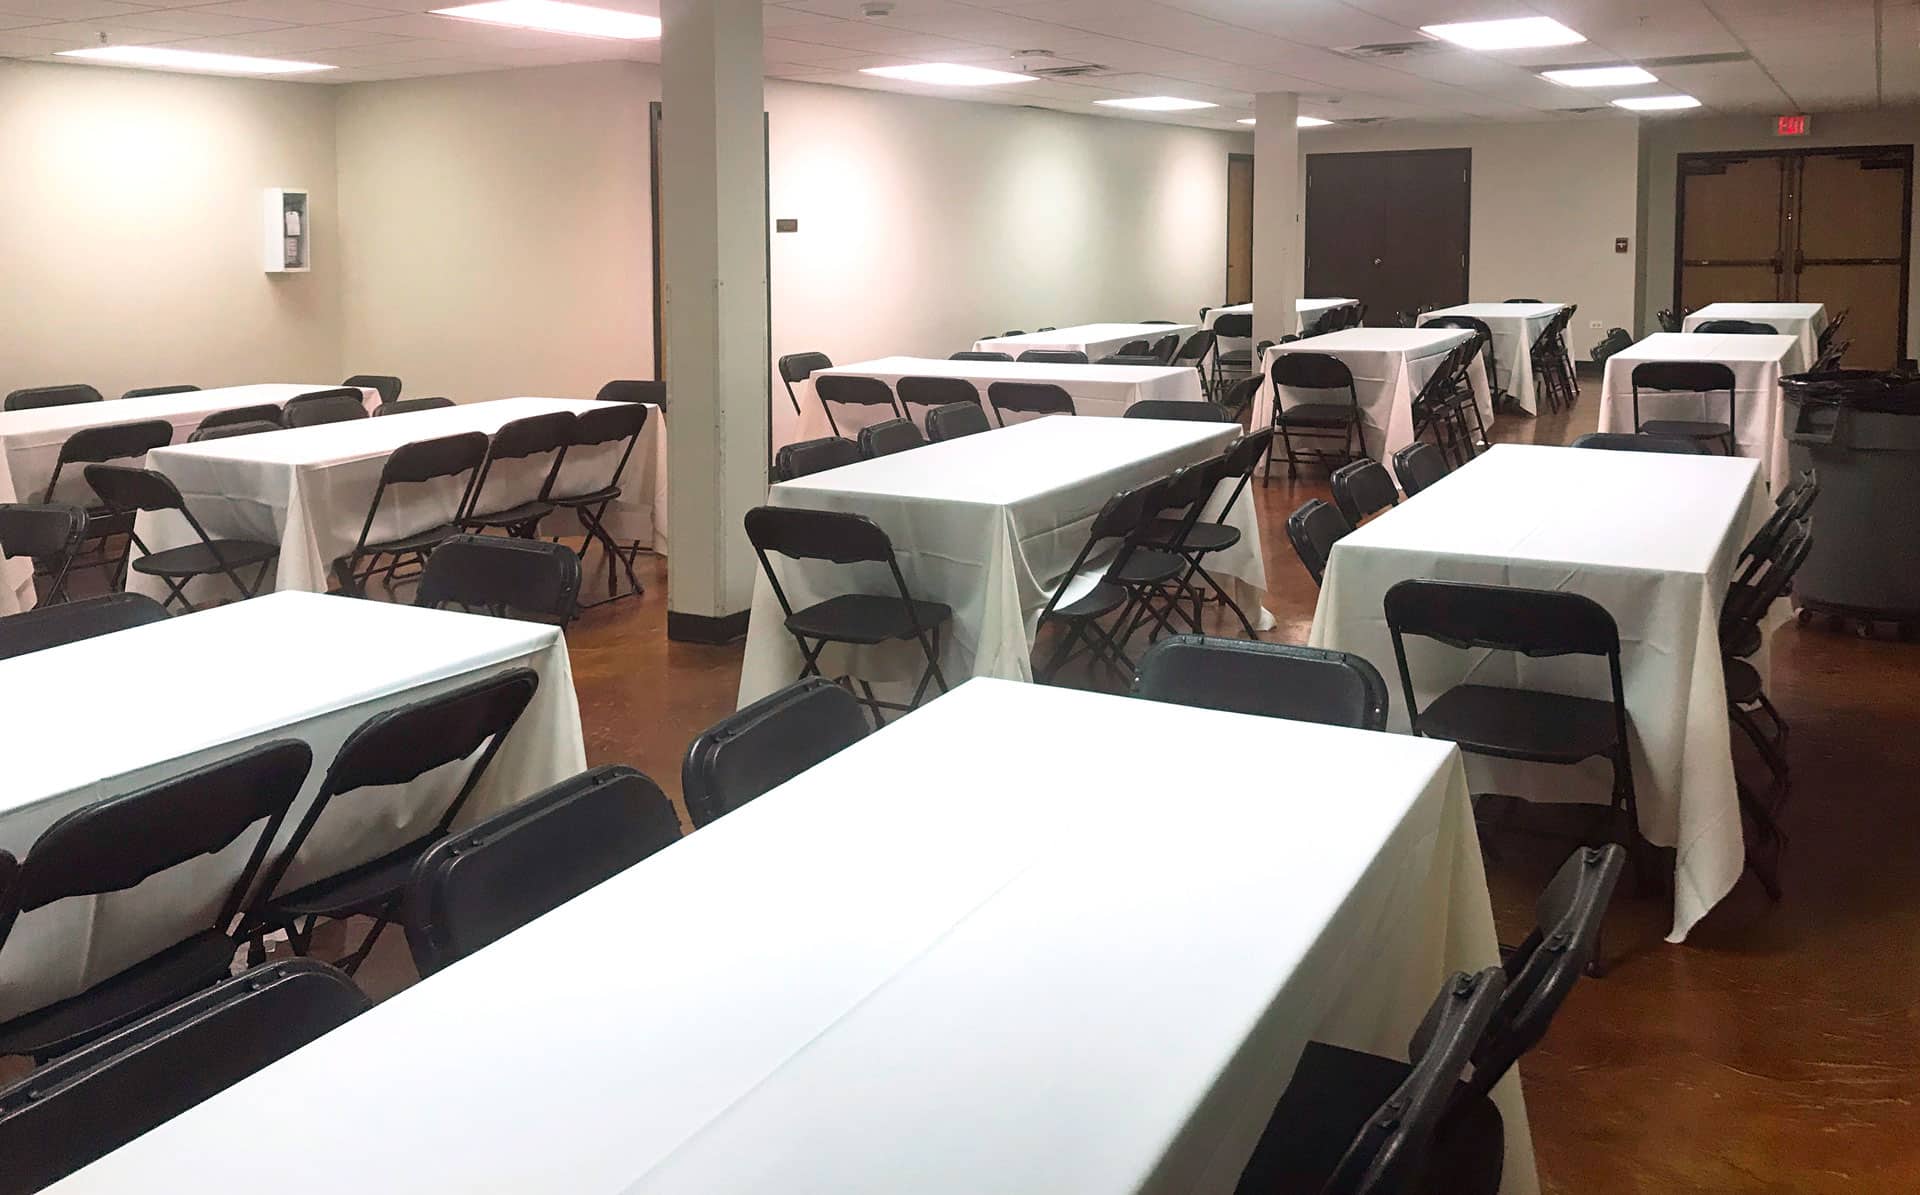 Gorton Center Card Room filled with tables